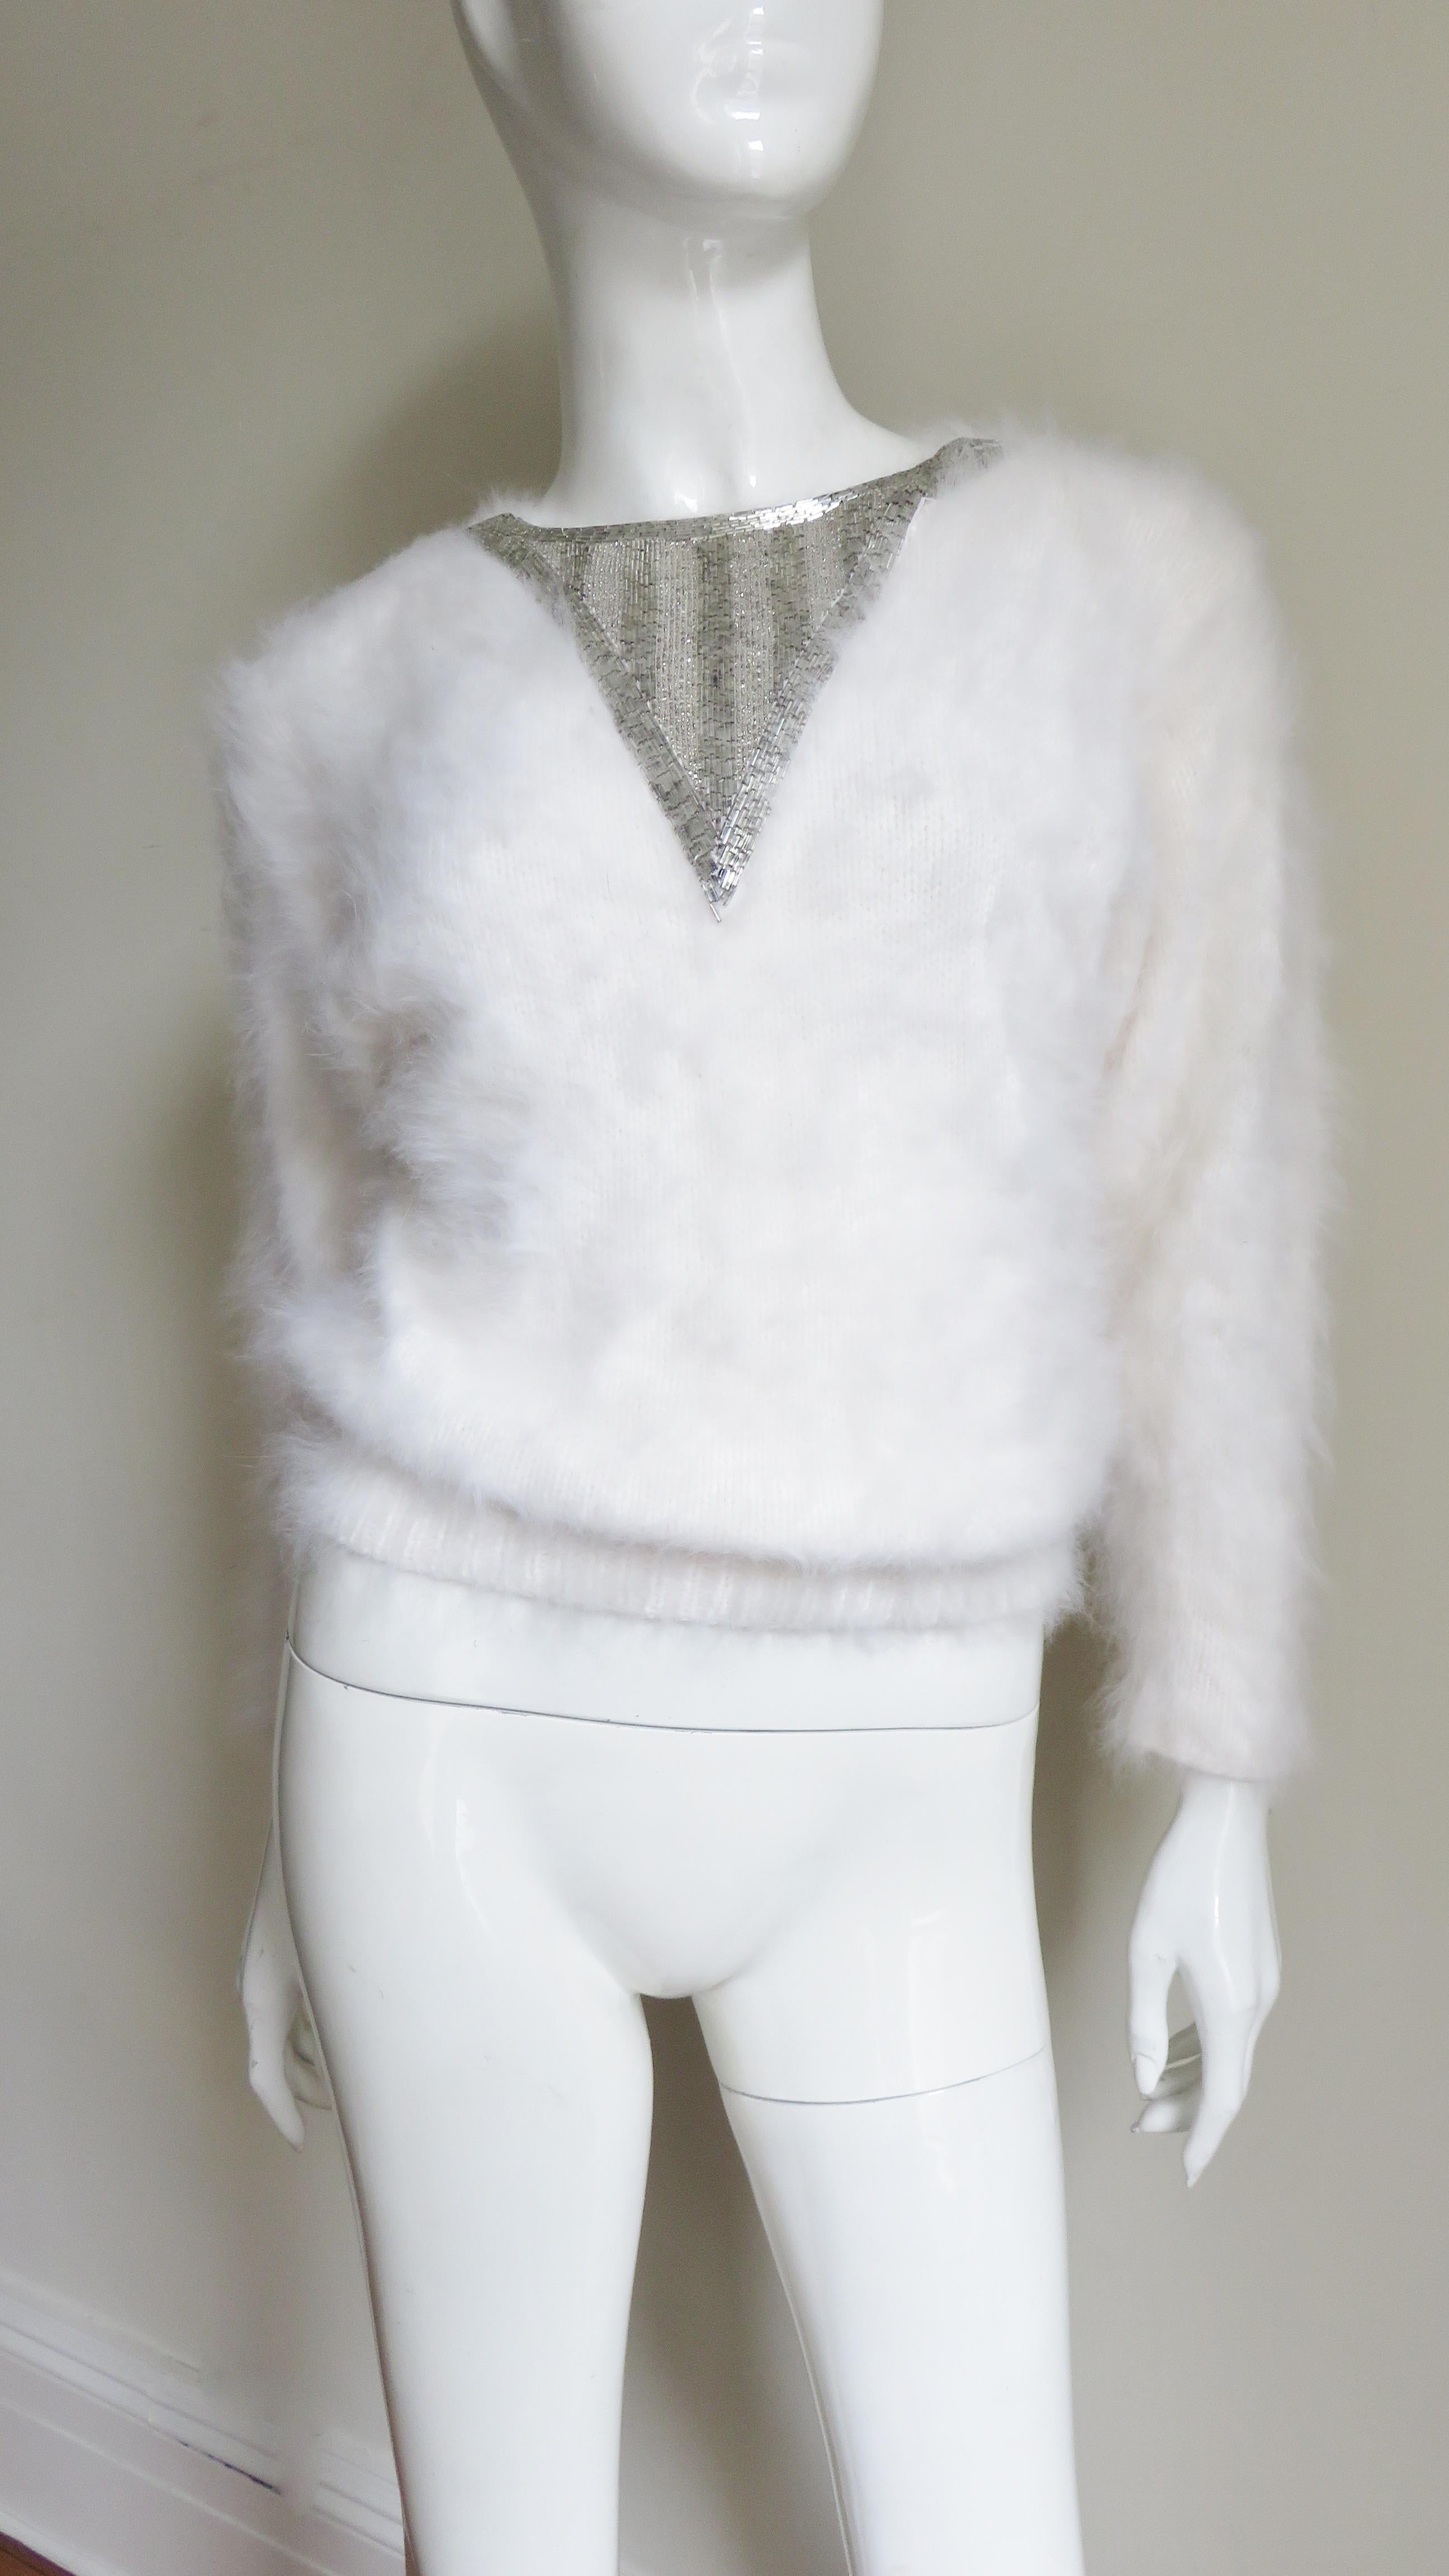 A very pretty white angora sweater from J. J. Or.  It has a silver glass beaded V inset at the center front neck and pearl button closing at the back neck.
Unworn.  Fits sizes Extra Small, Small, Medium.

Bust  36-38